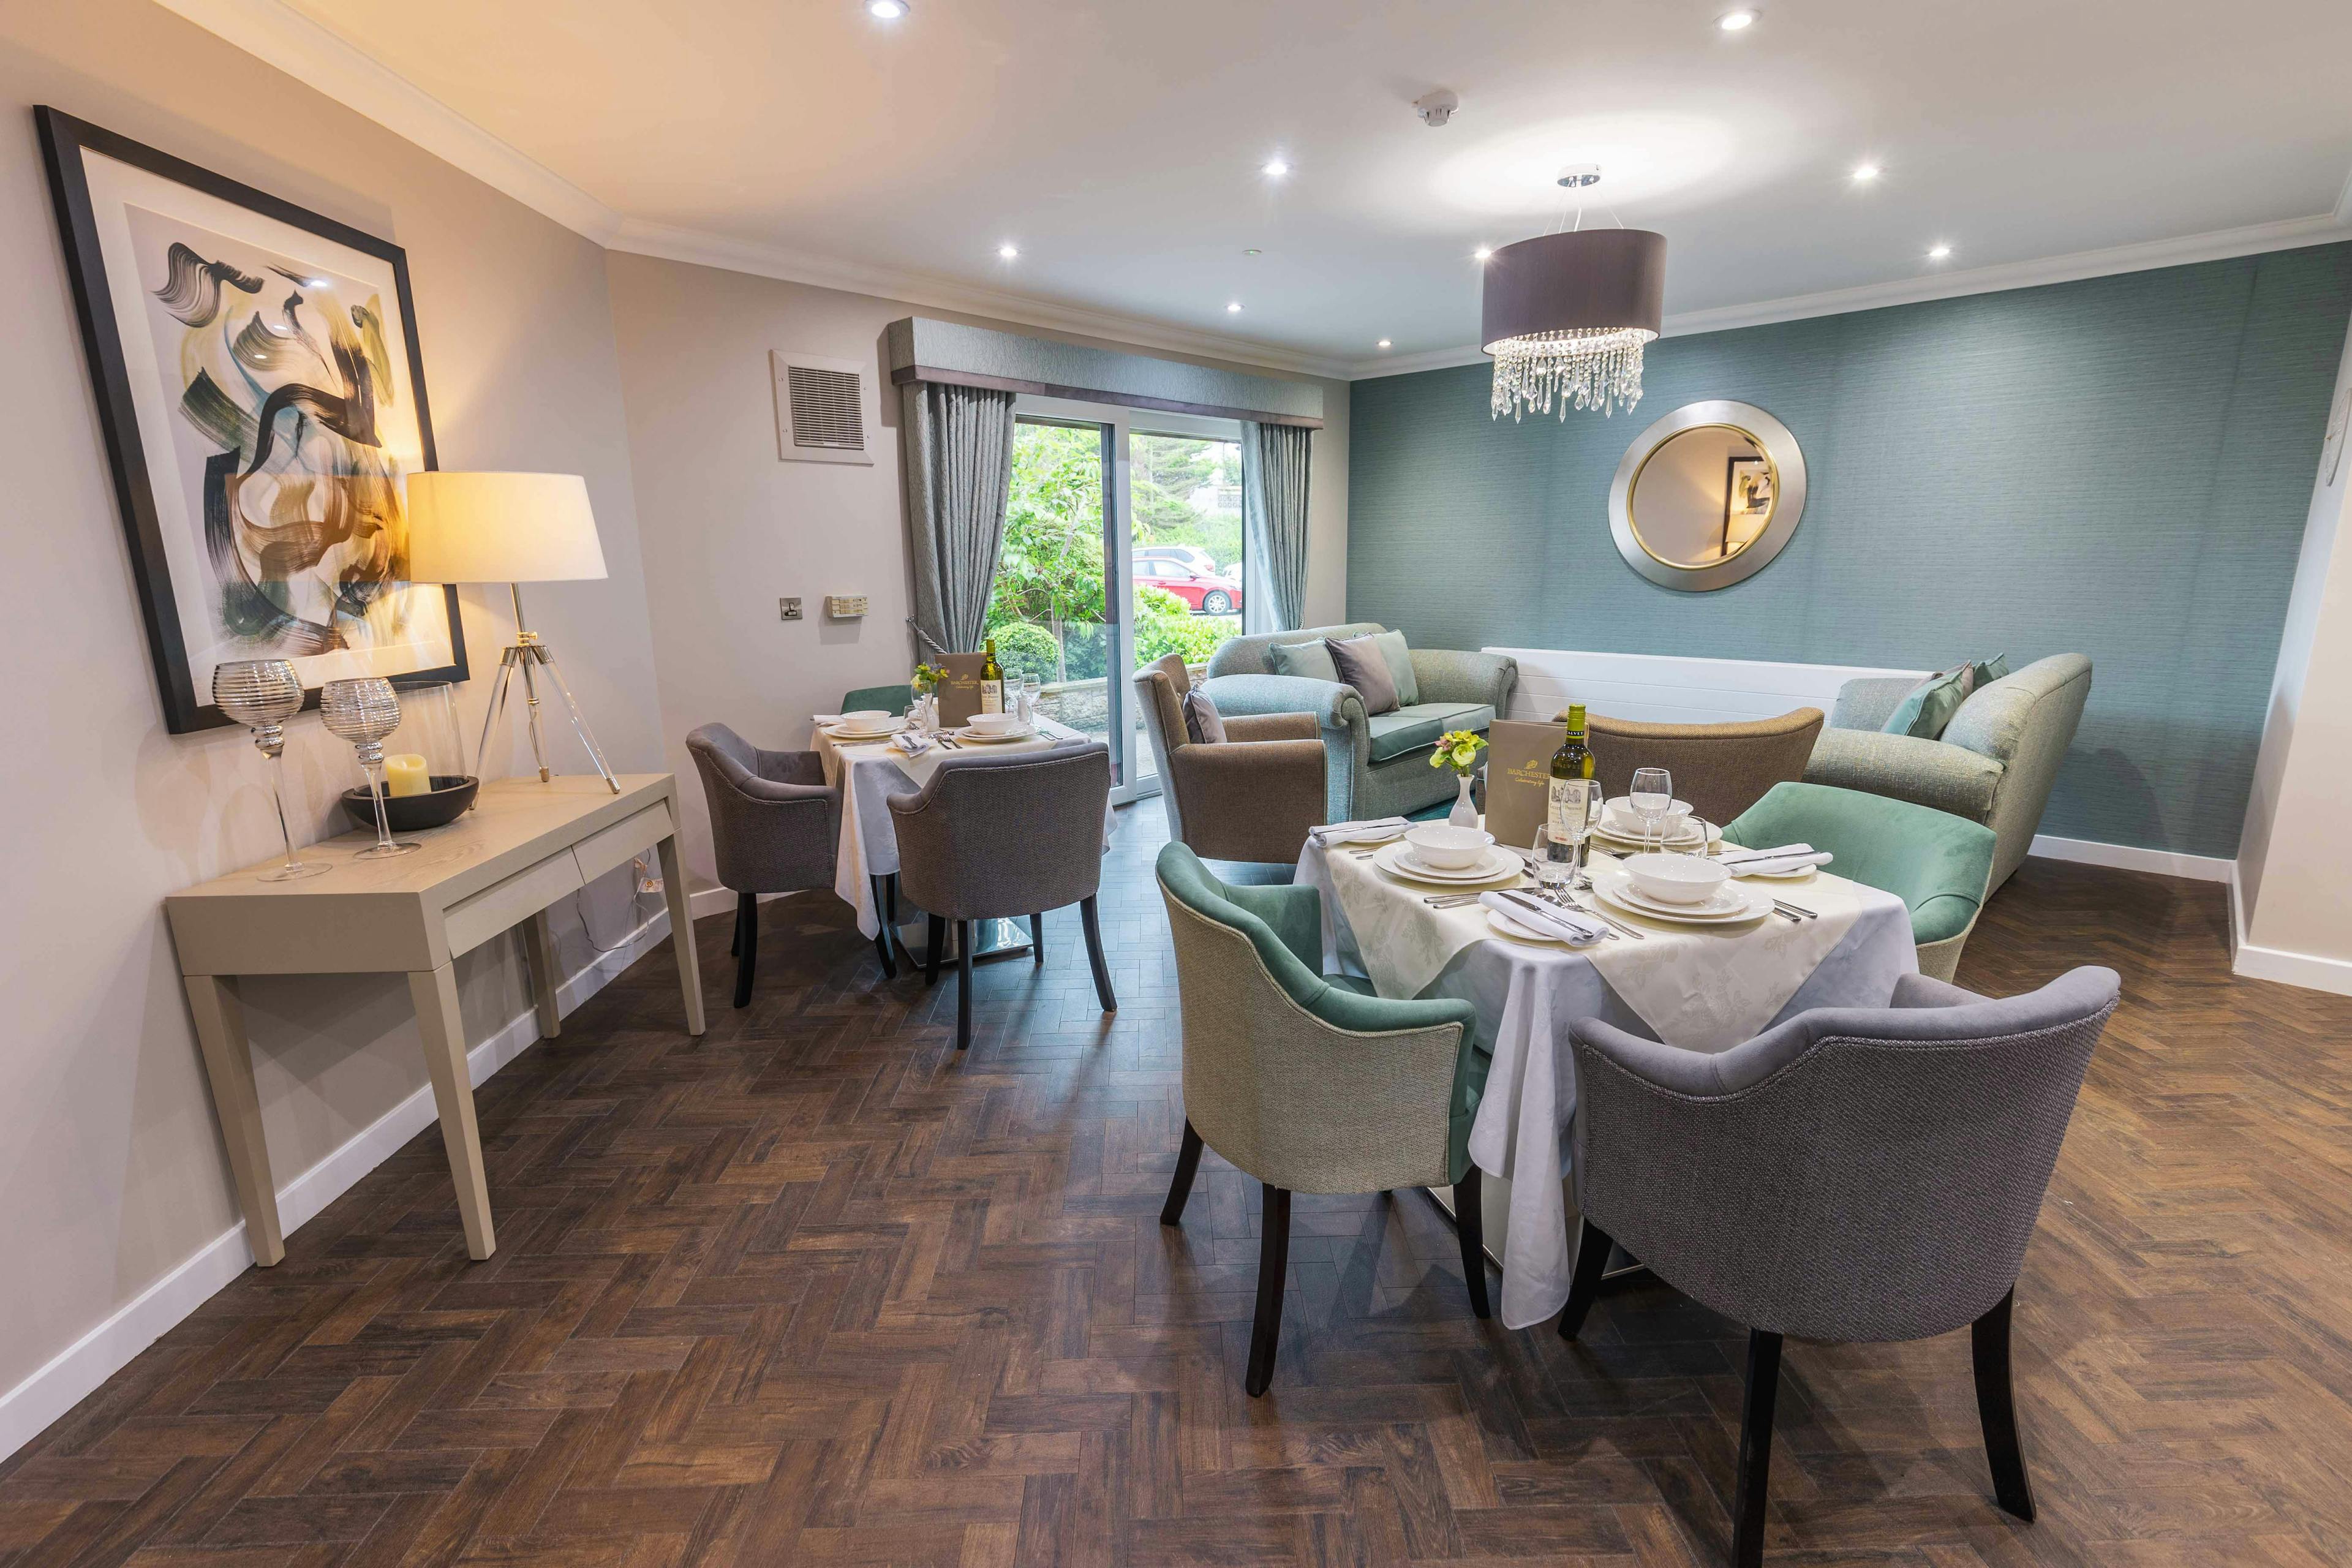 Dining Room at Kirkburn Court Care Home in Peterhead, Aberdeenshire